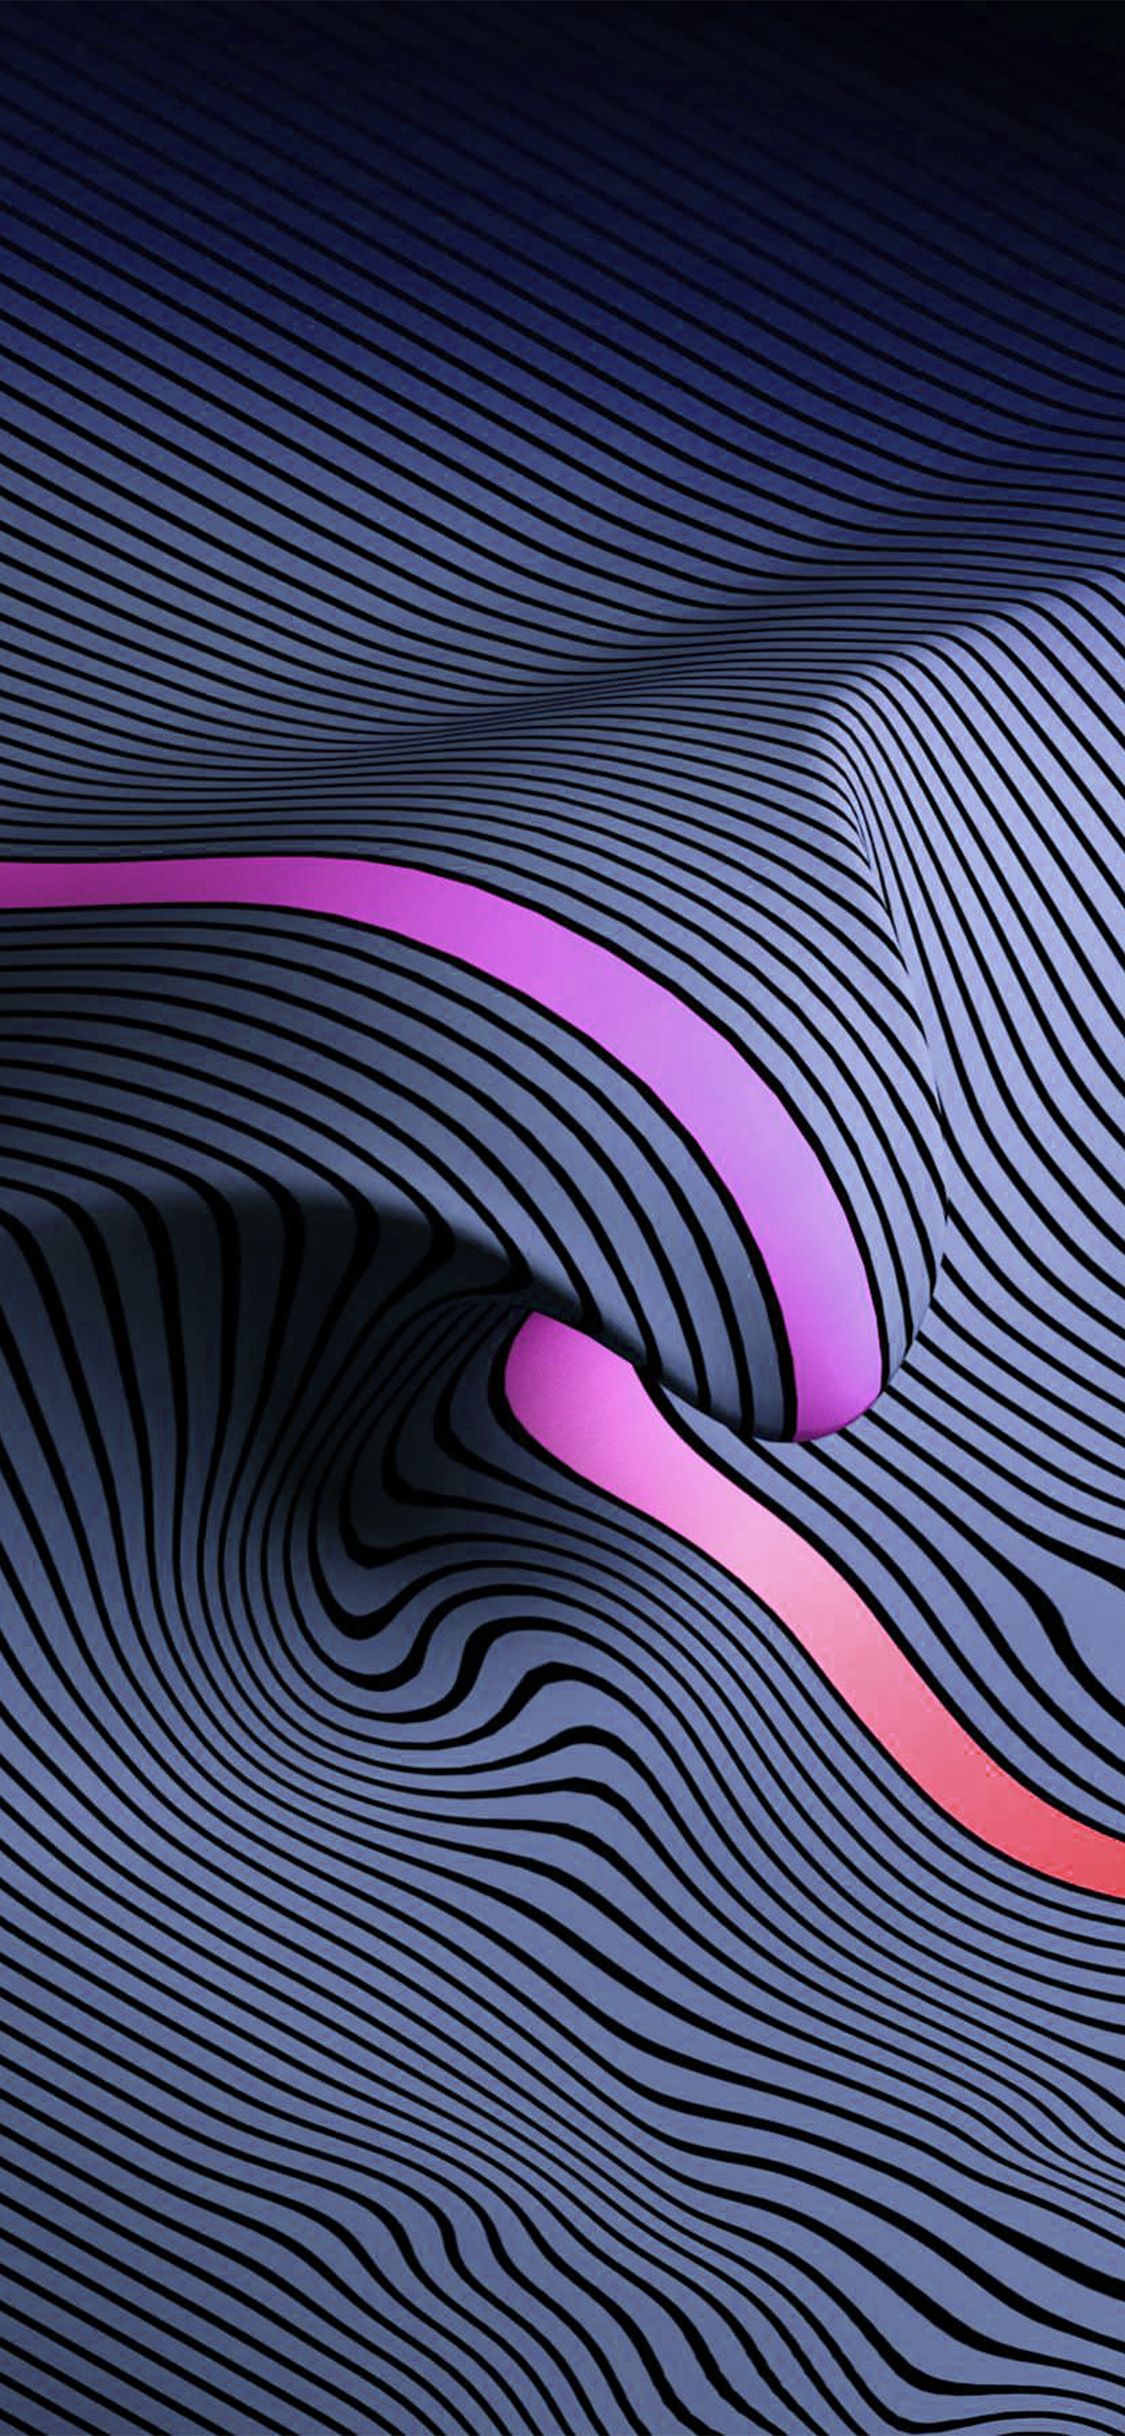 iPhone X wallpaper. blue line digital abstract pattern background